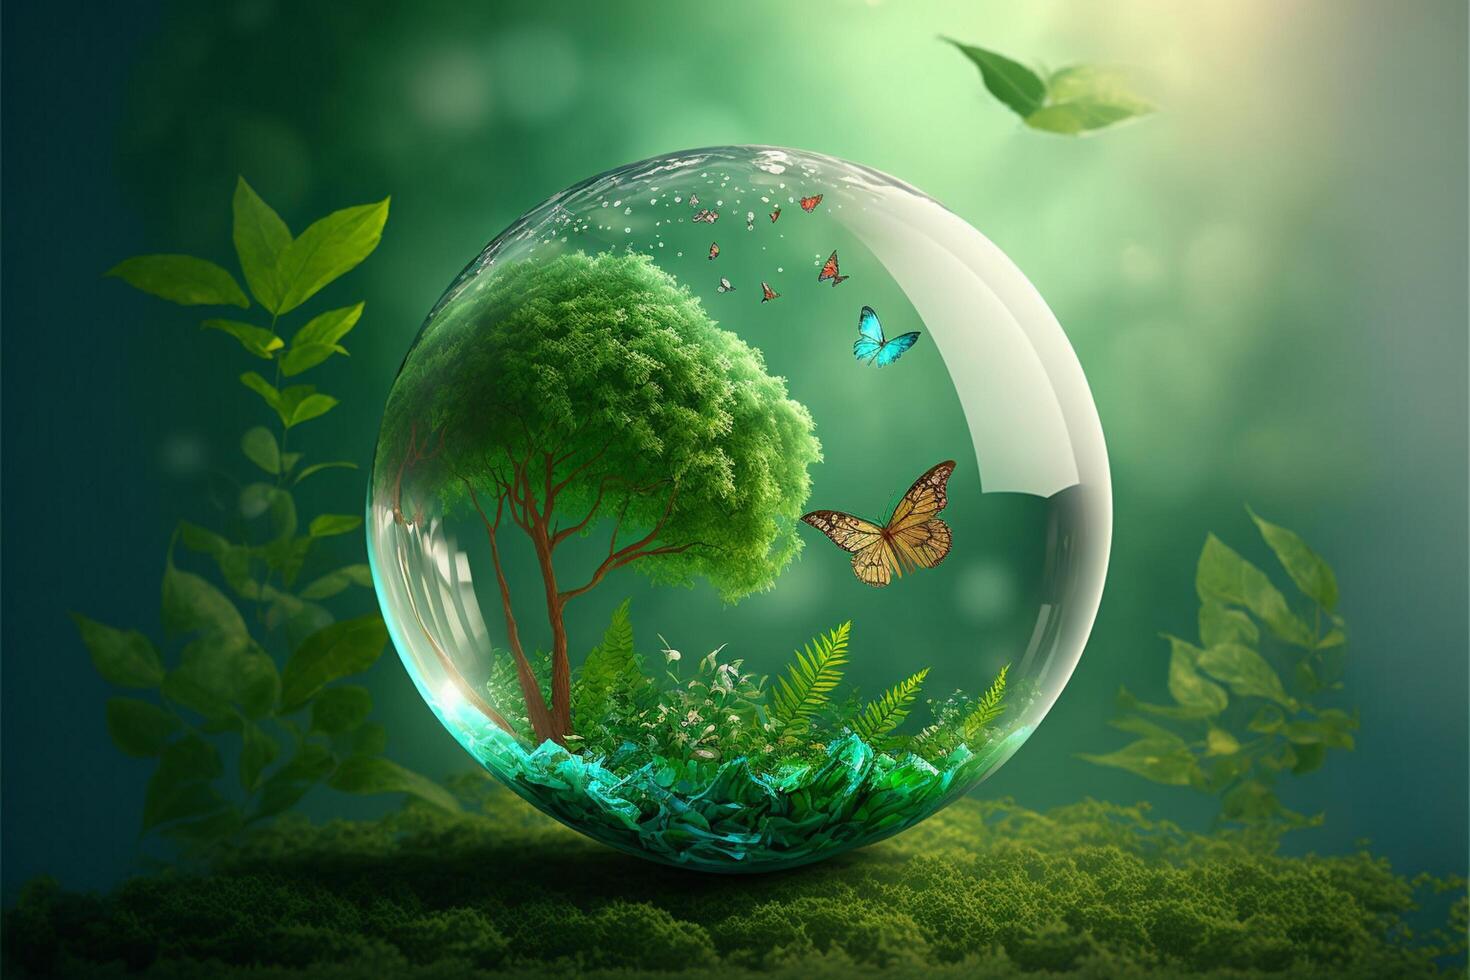 Earth Day Environment Day Nature Green Glossy background Images tree and water photo